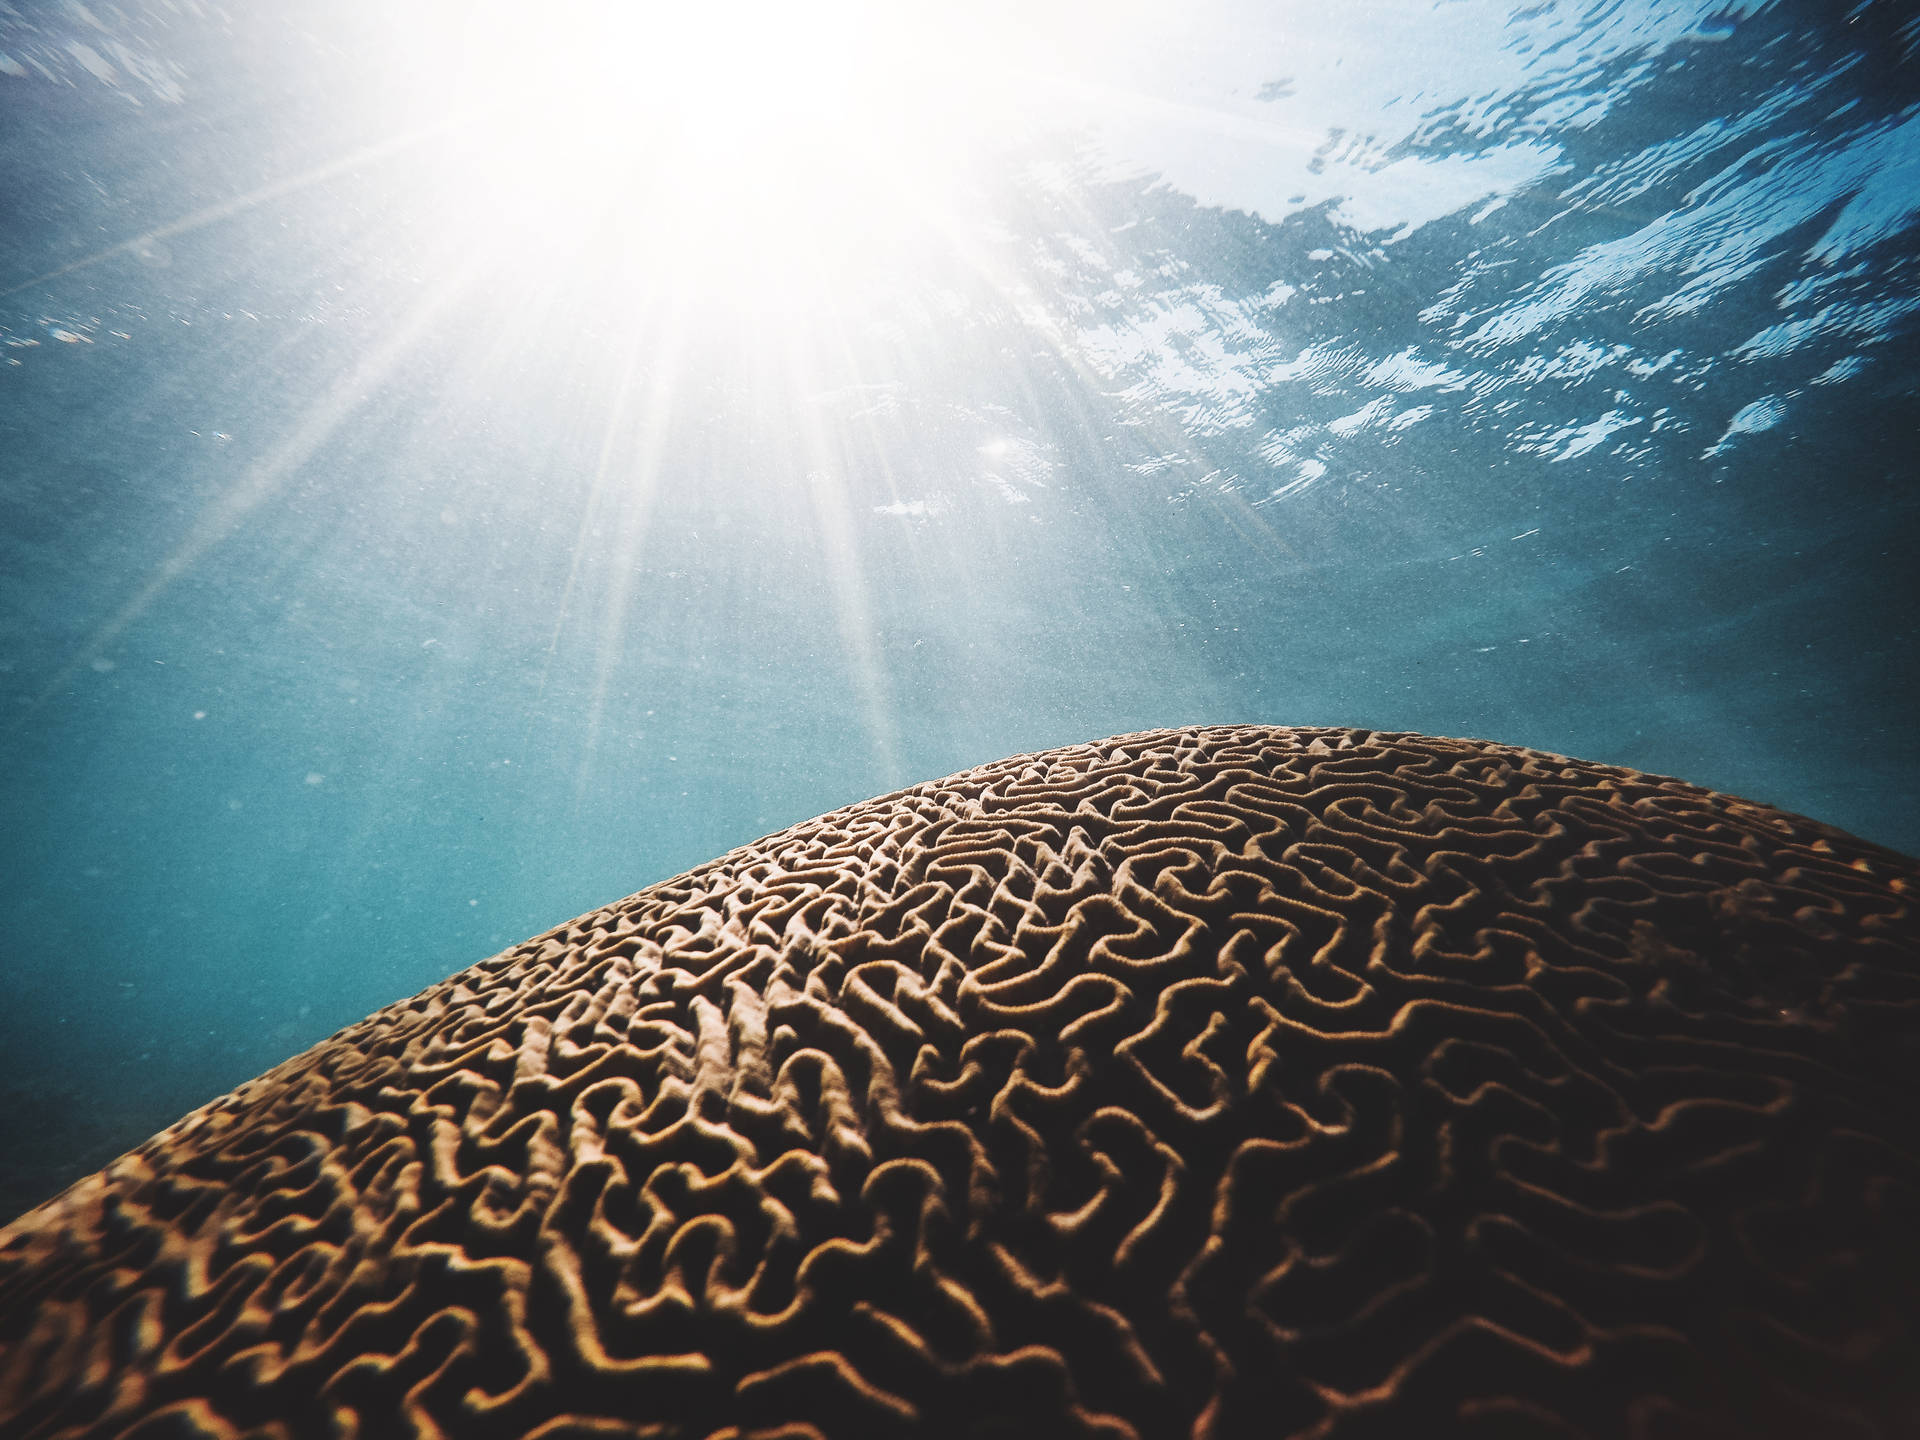 Saintlucia Marigot Bay Brain Coral Can Be Translated To 